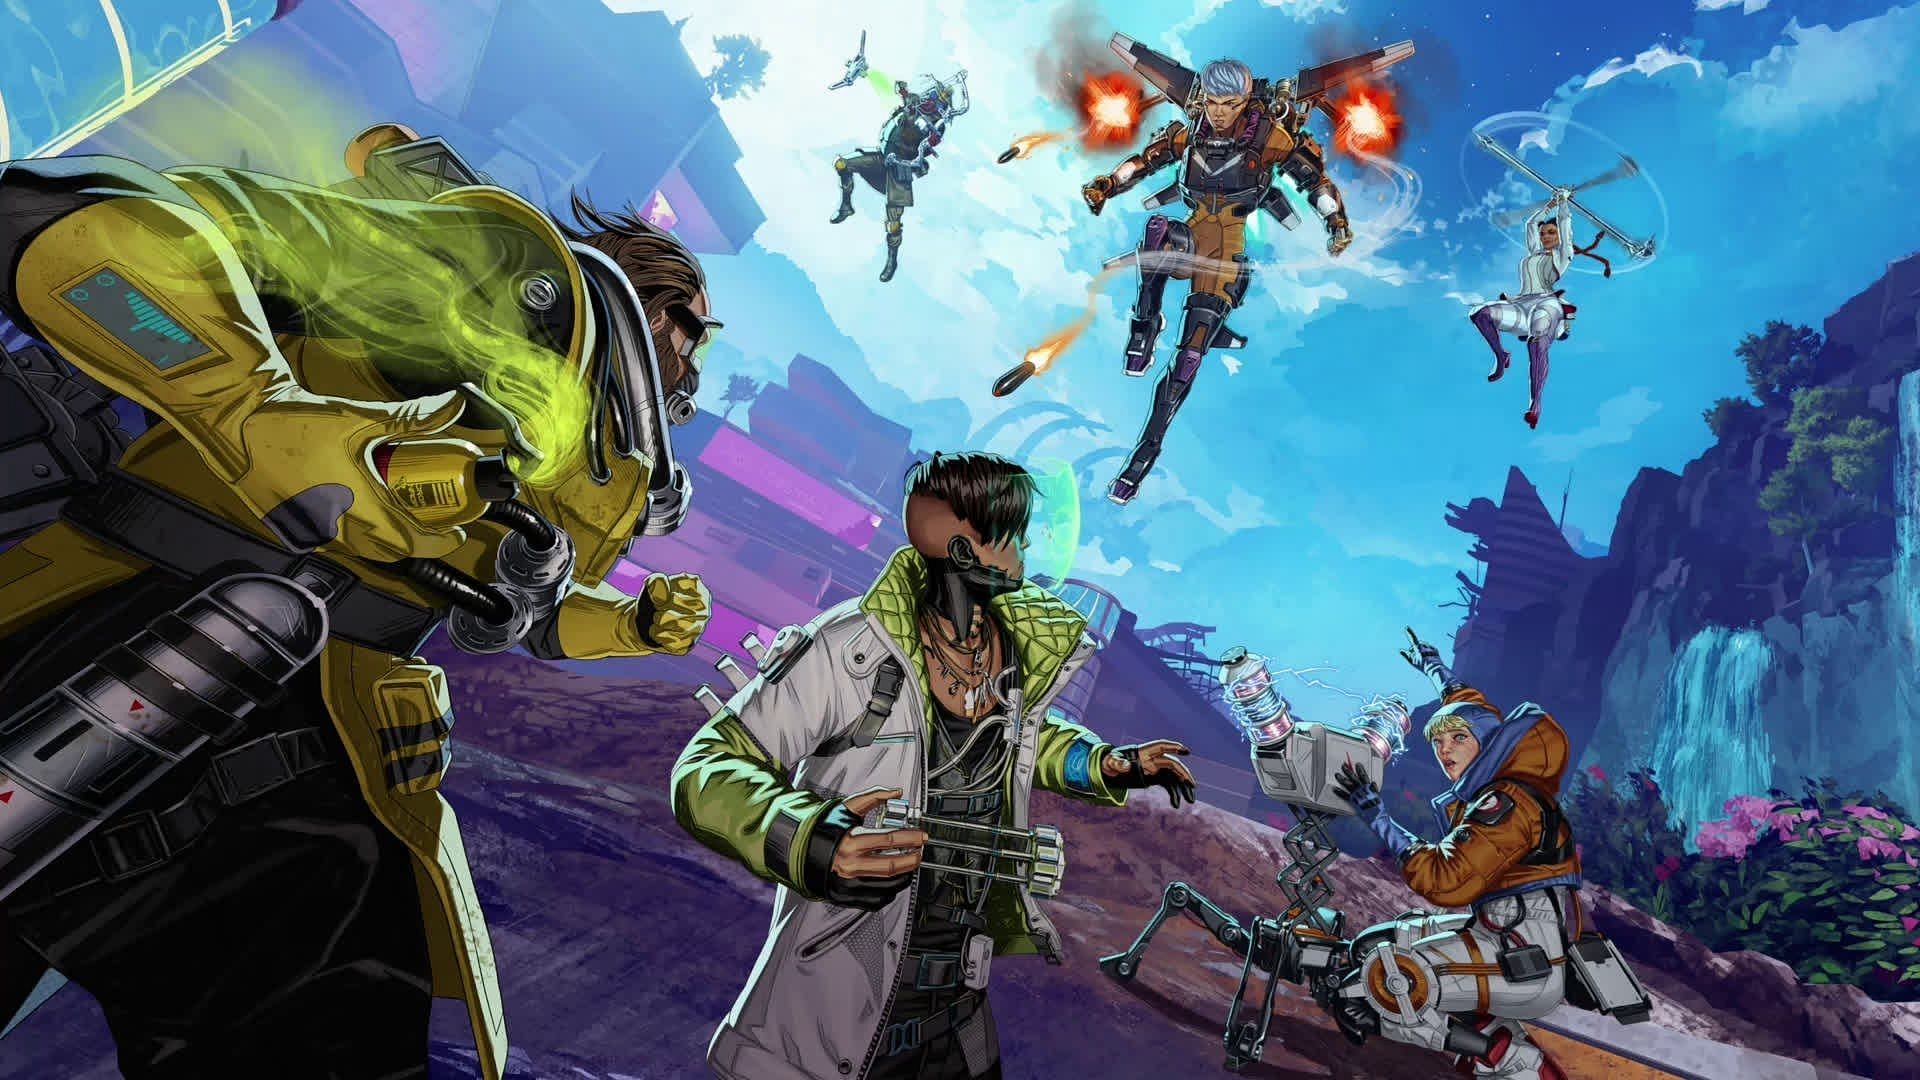 Apex Legends is one of the top 5 battle royale games in 2022 (image via Respawn Entertainment)